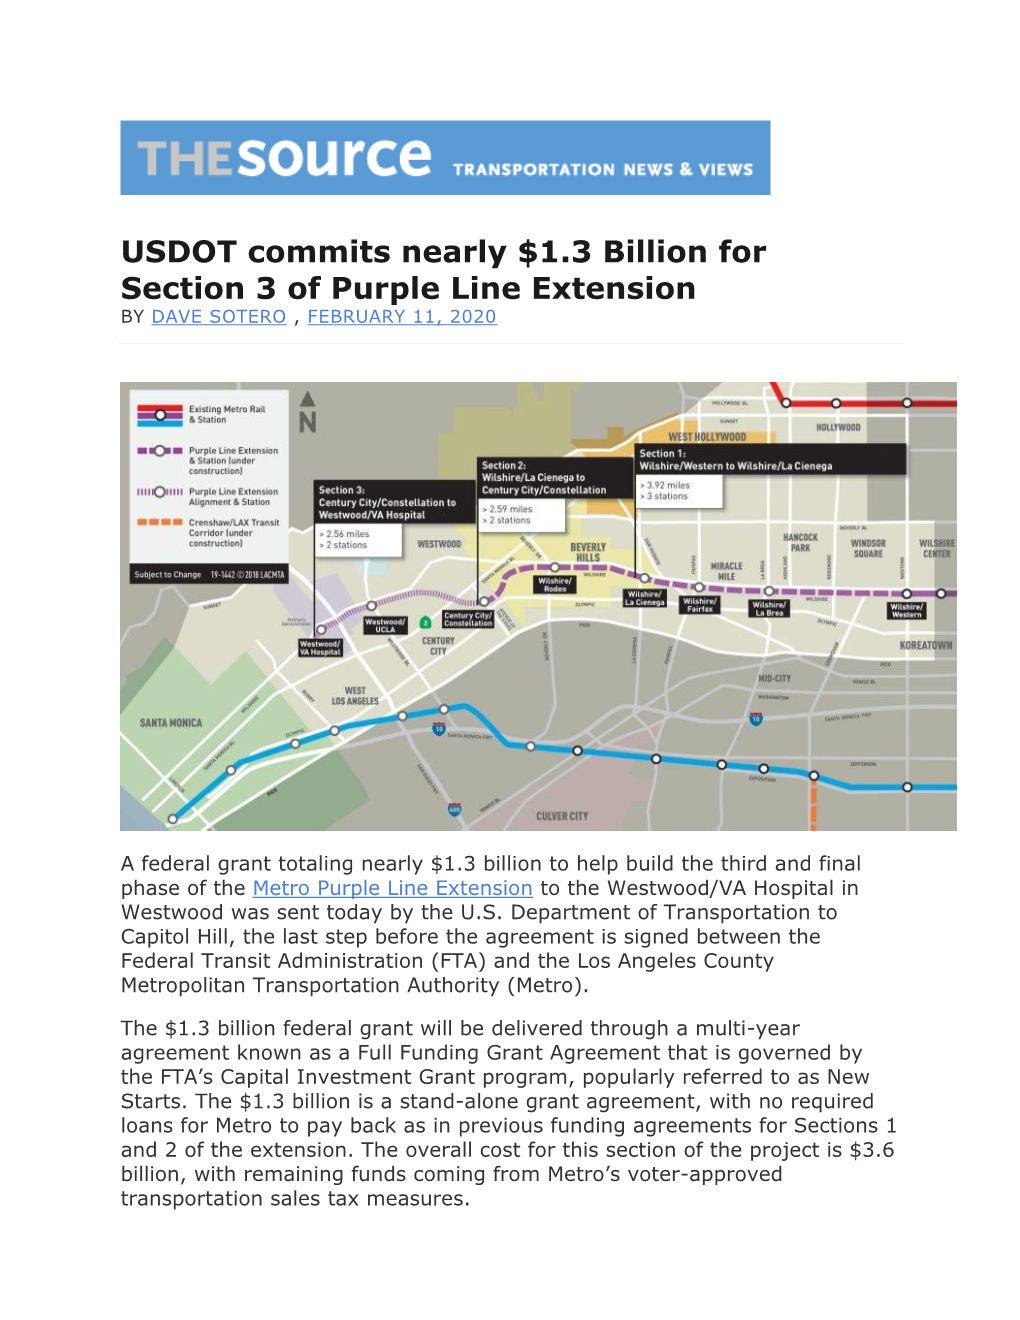 USDOT Commits Nearly $1.3 Billion for Section 3 of Purple Line Extension by DAVE SOTERO , FEBRUARY 11, 2020